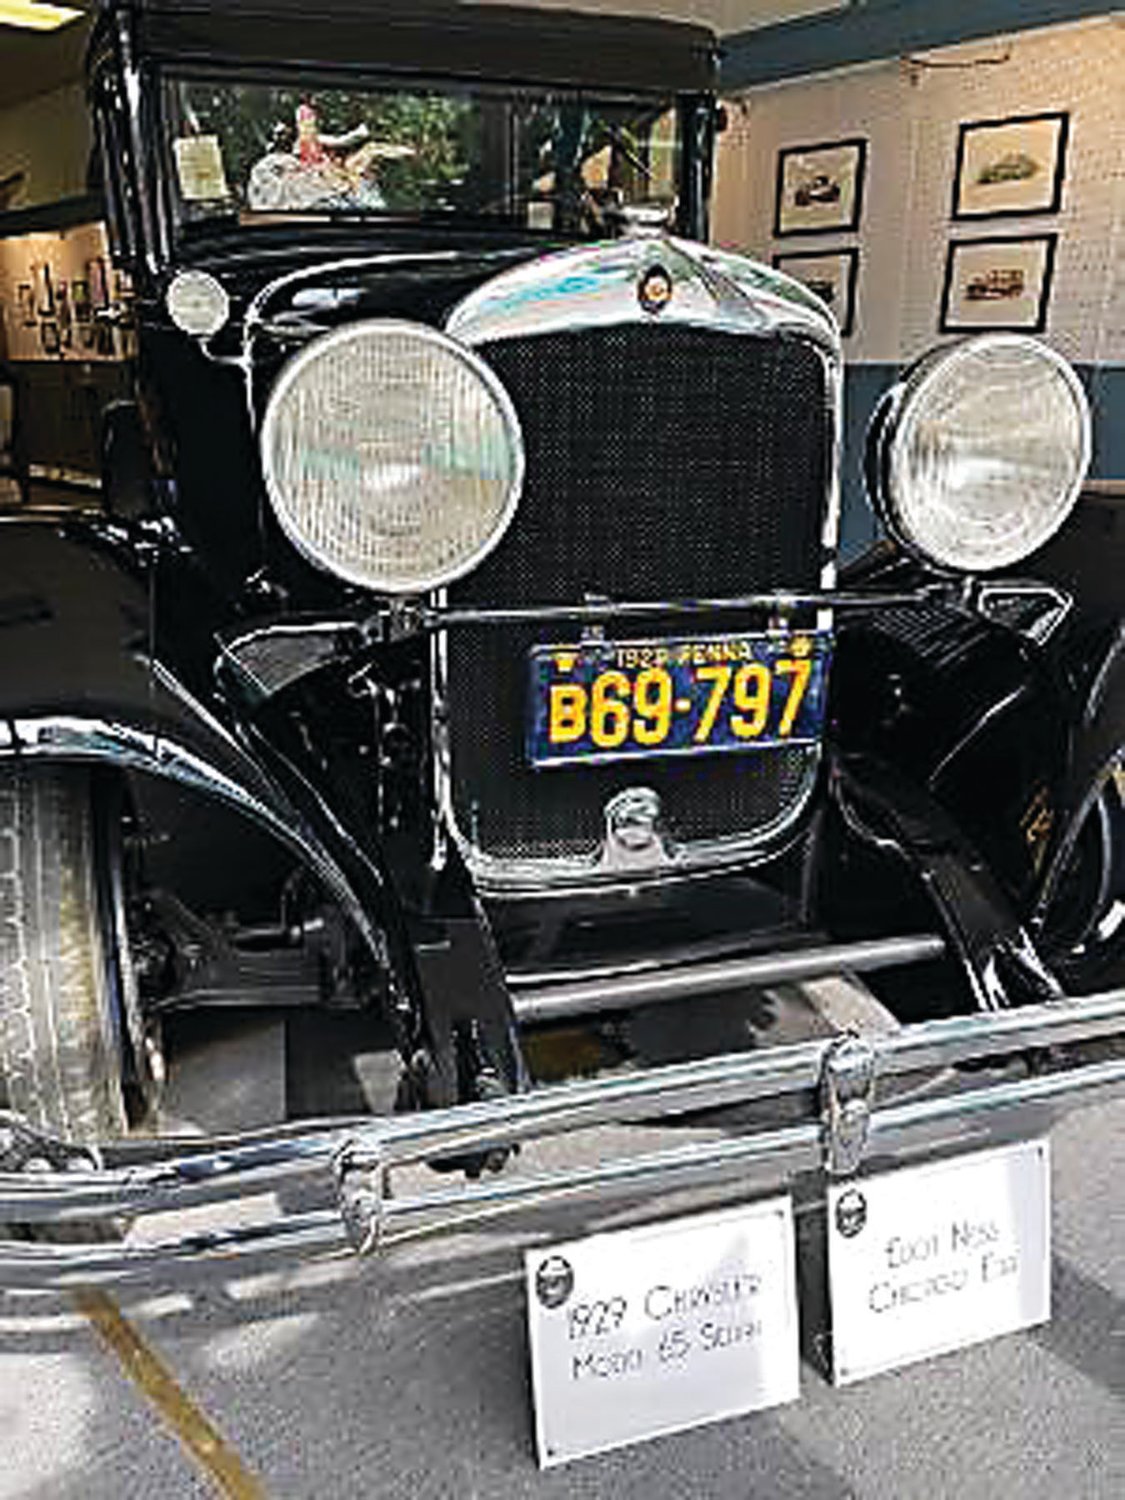 CLARK
A 1929 Chrysler sedan is one of the museum’s vintage cars that would have been seen on the streets of Chicago and Cleveland during the Prohibition Era.